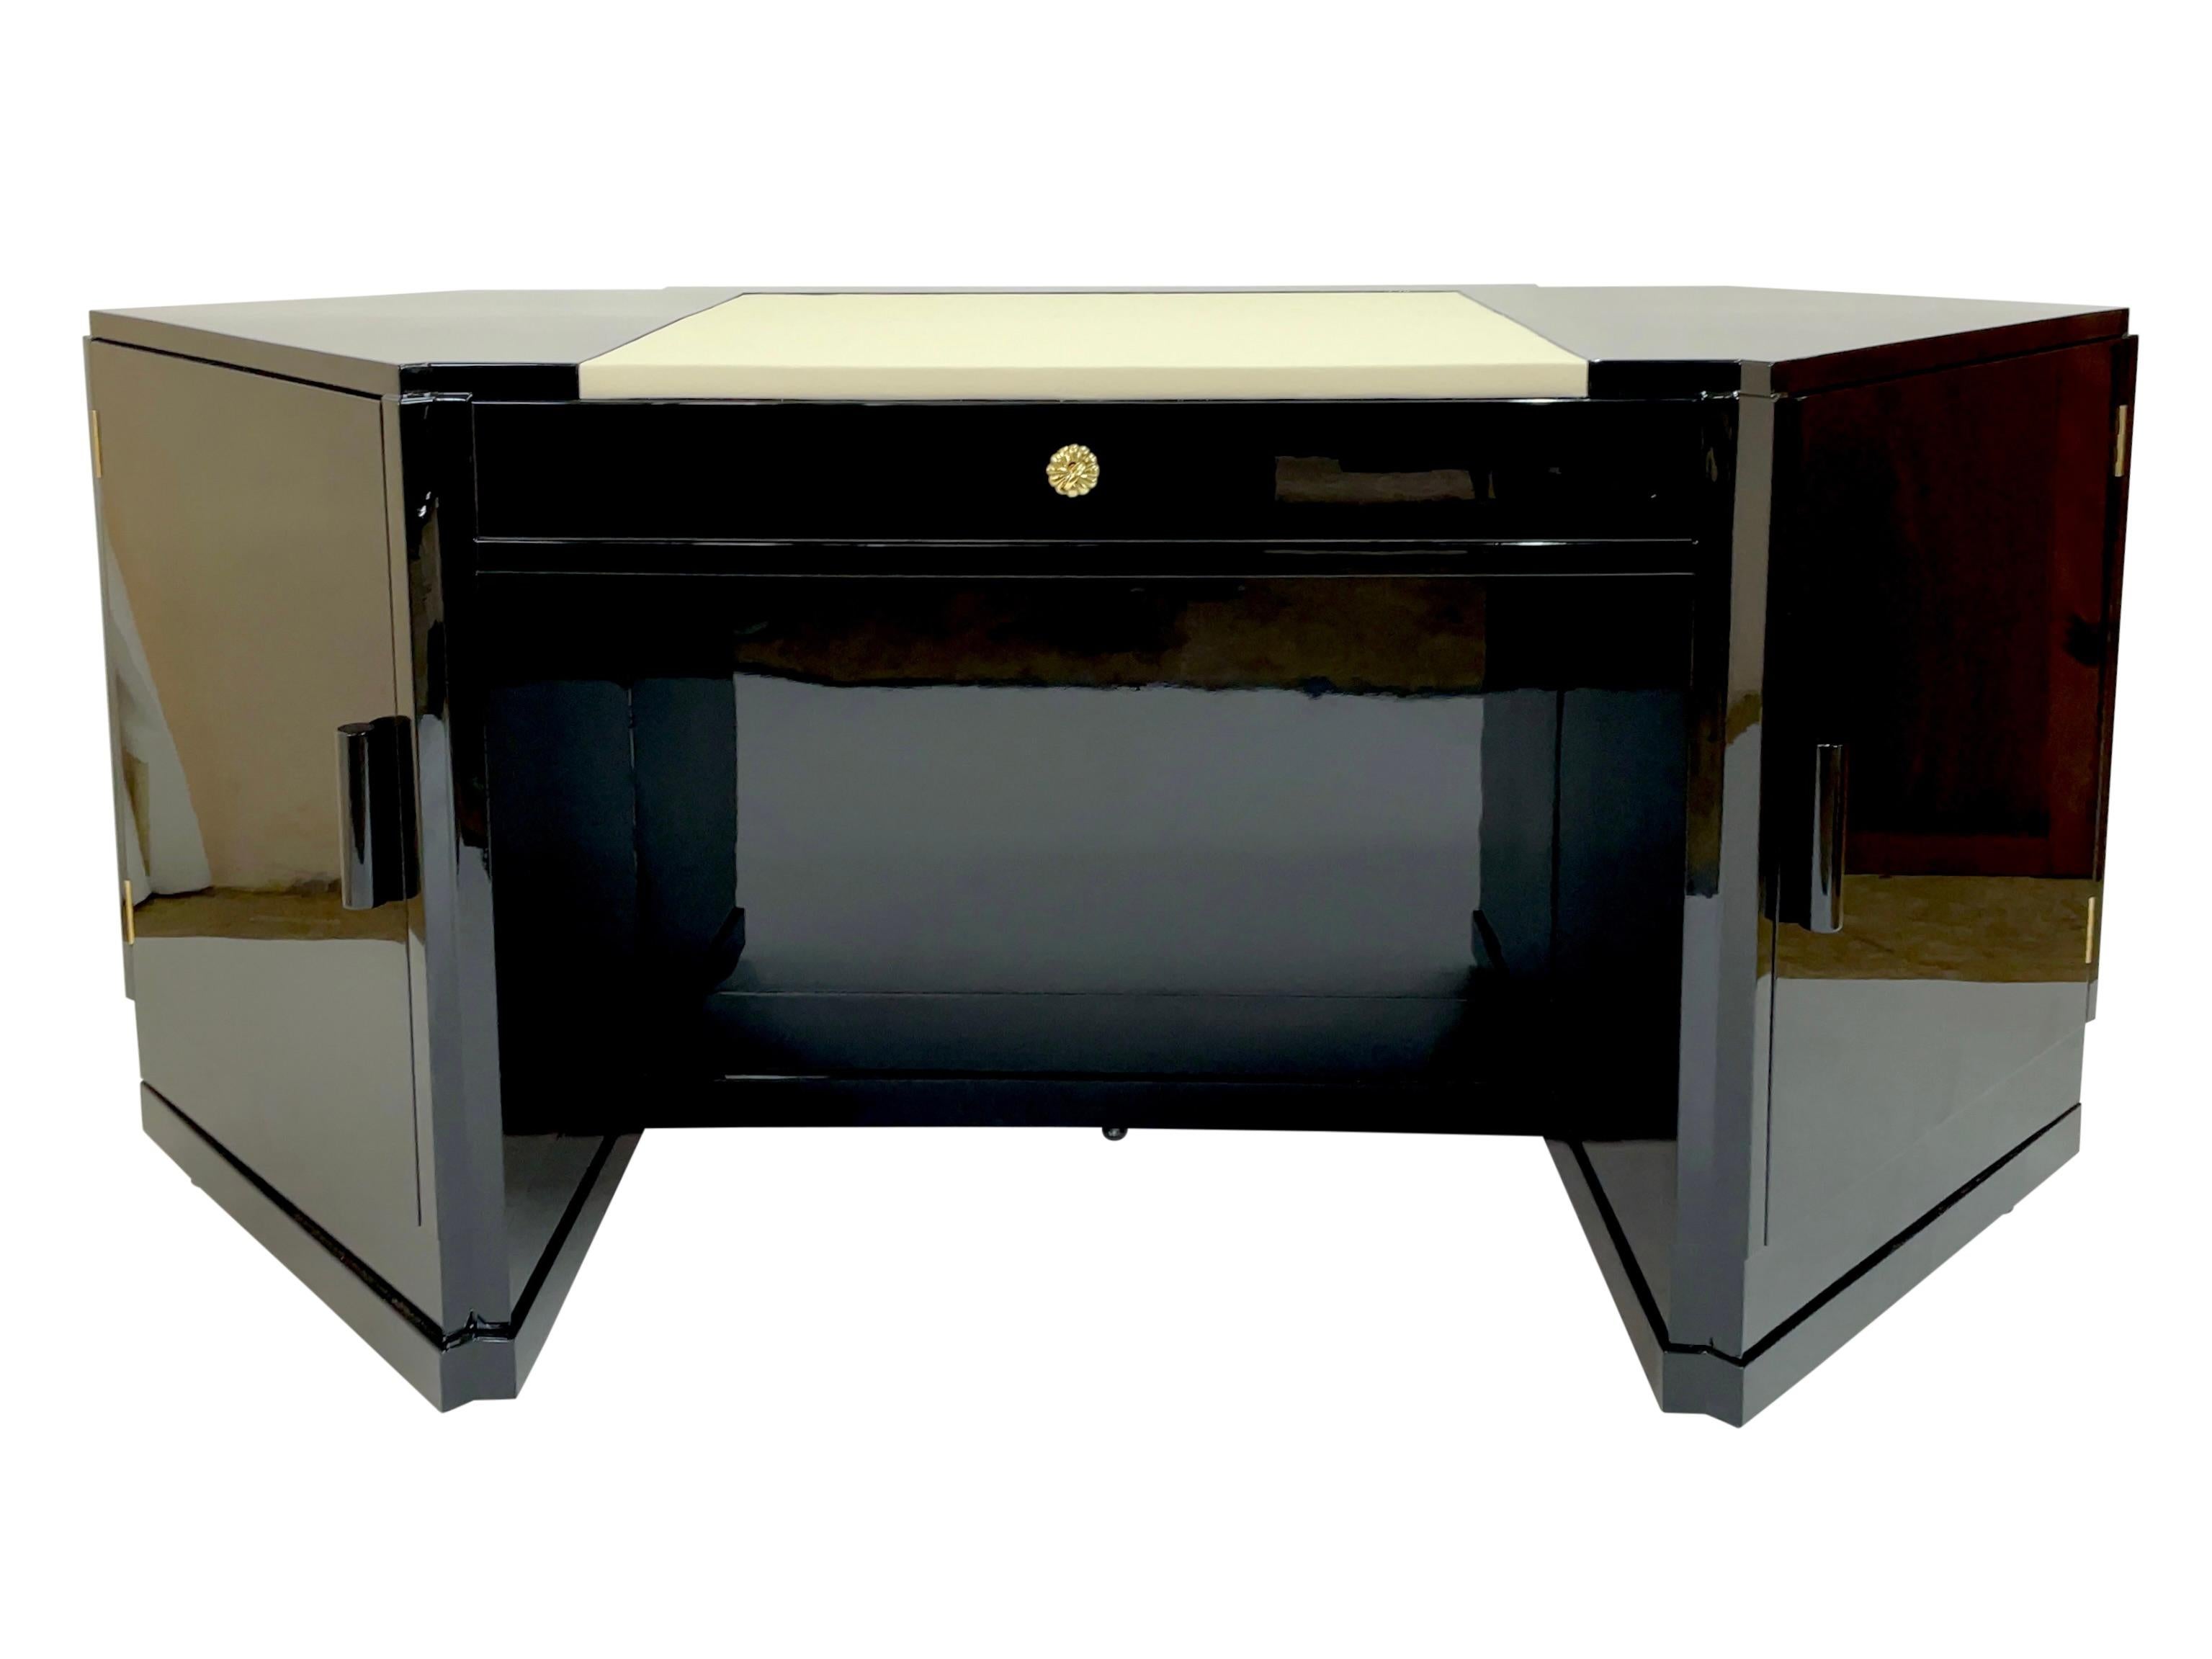 Tapered desk
Piano lacquer in black high gloss
Work surface with real leather, beige
Shelf on the opposite side to present your fine art (decorative objects not included). 

Original Art Deco, France 1930s

Dimensions:
Width: 177 cm
Height: